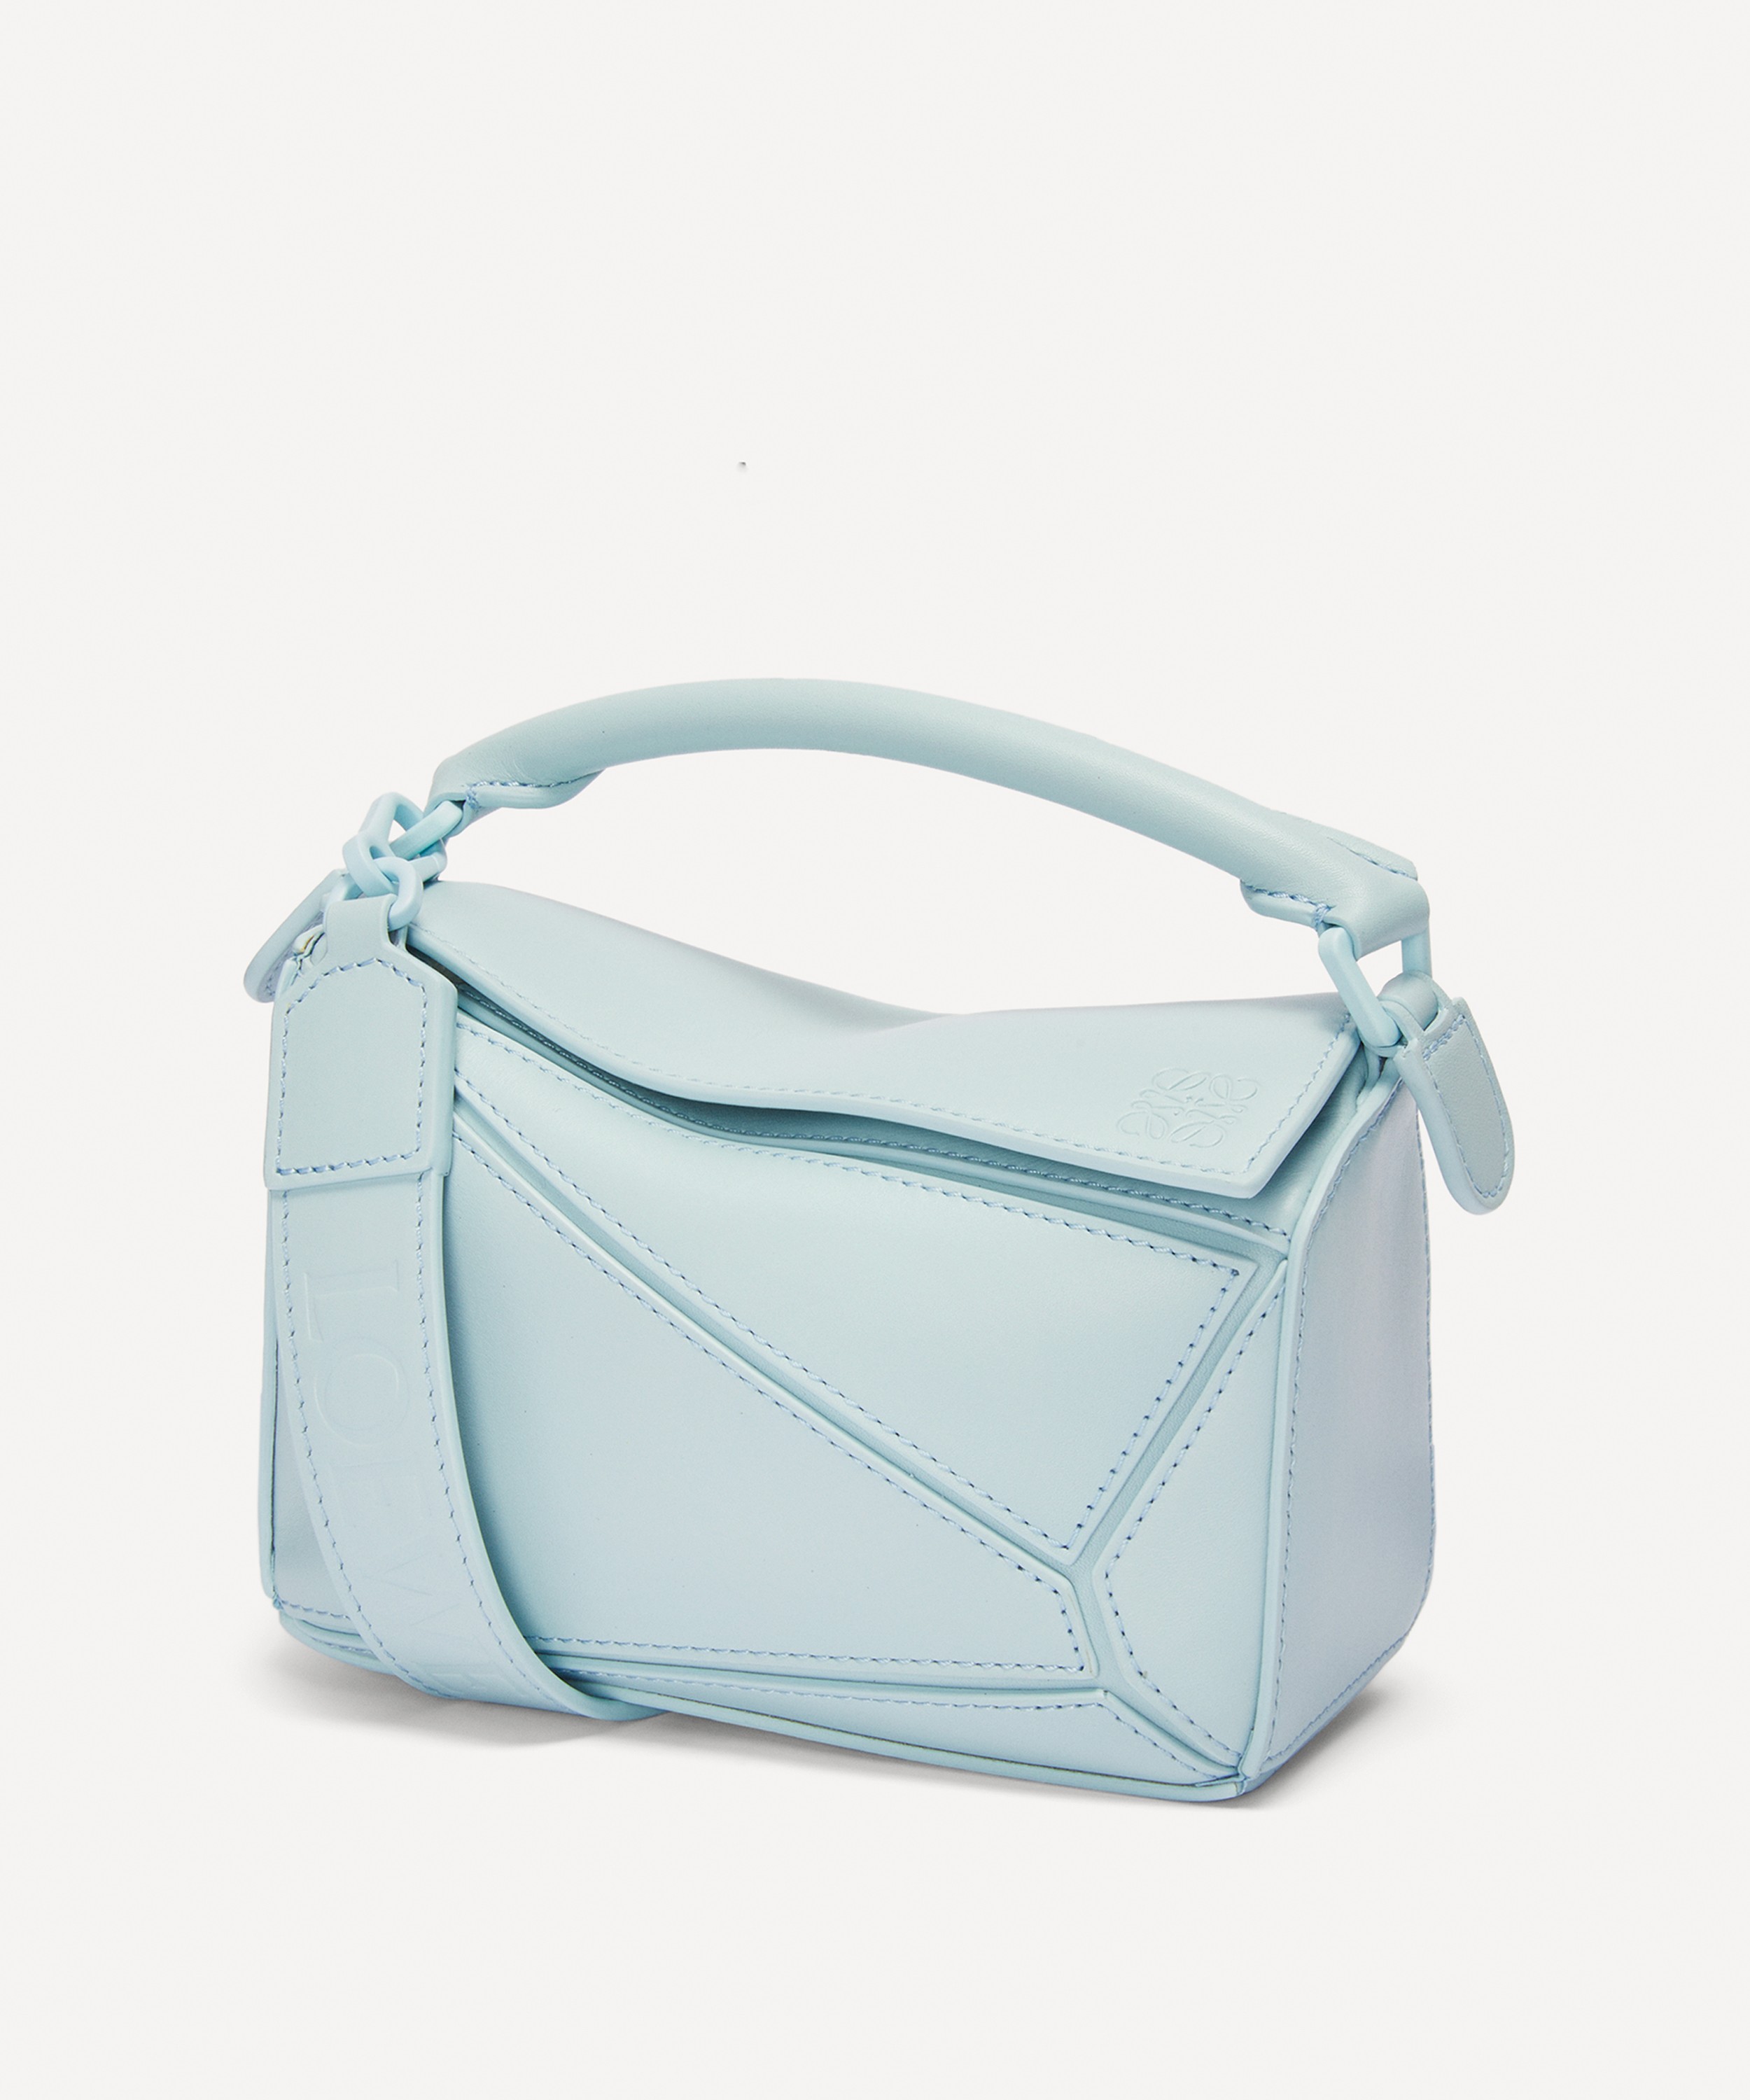 Loewe Small Puzzle Satin Leather Shoulder Bag